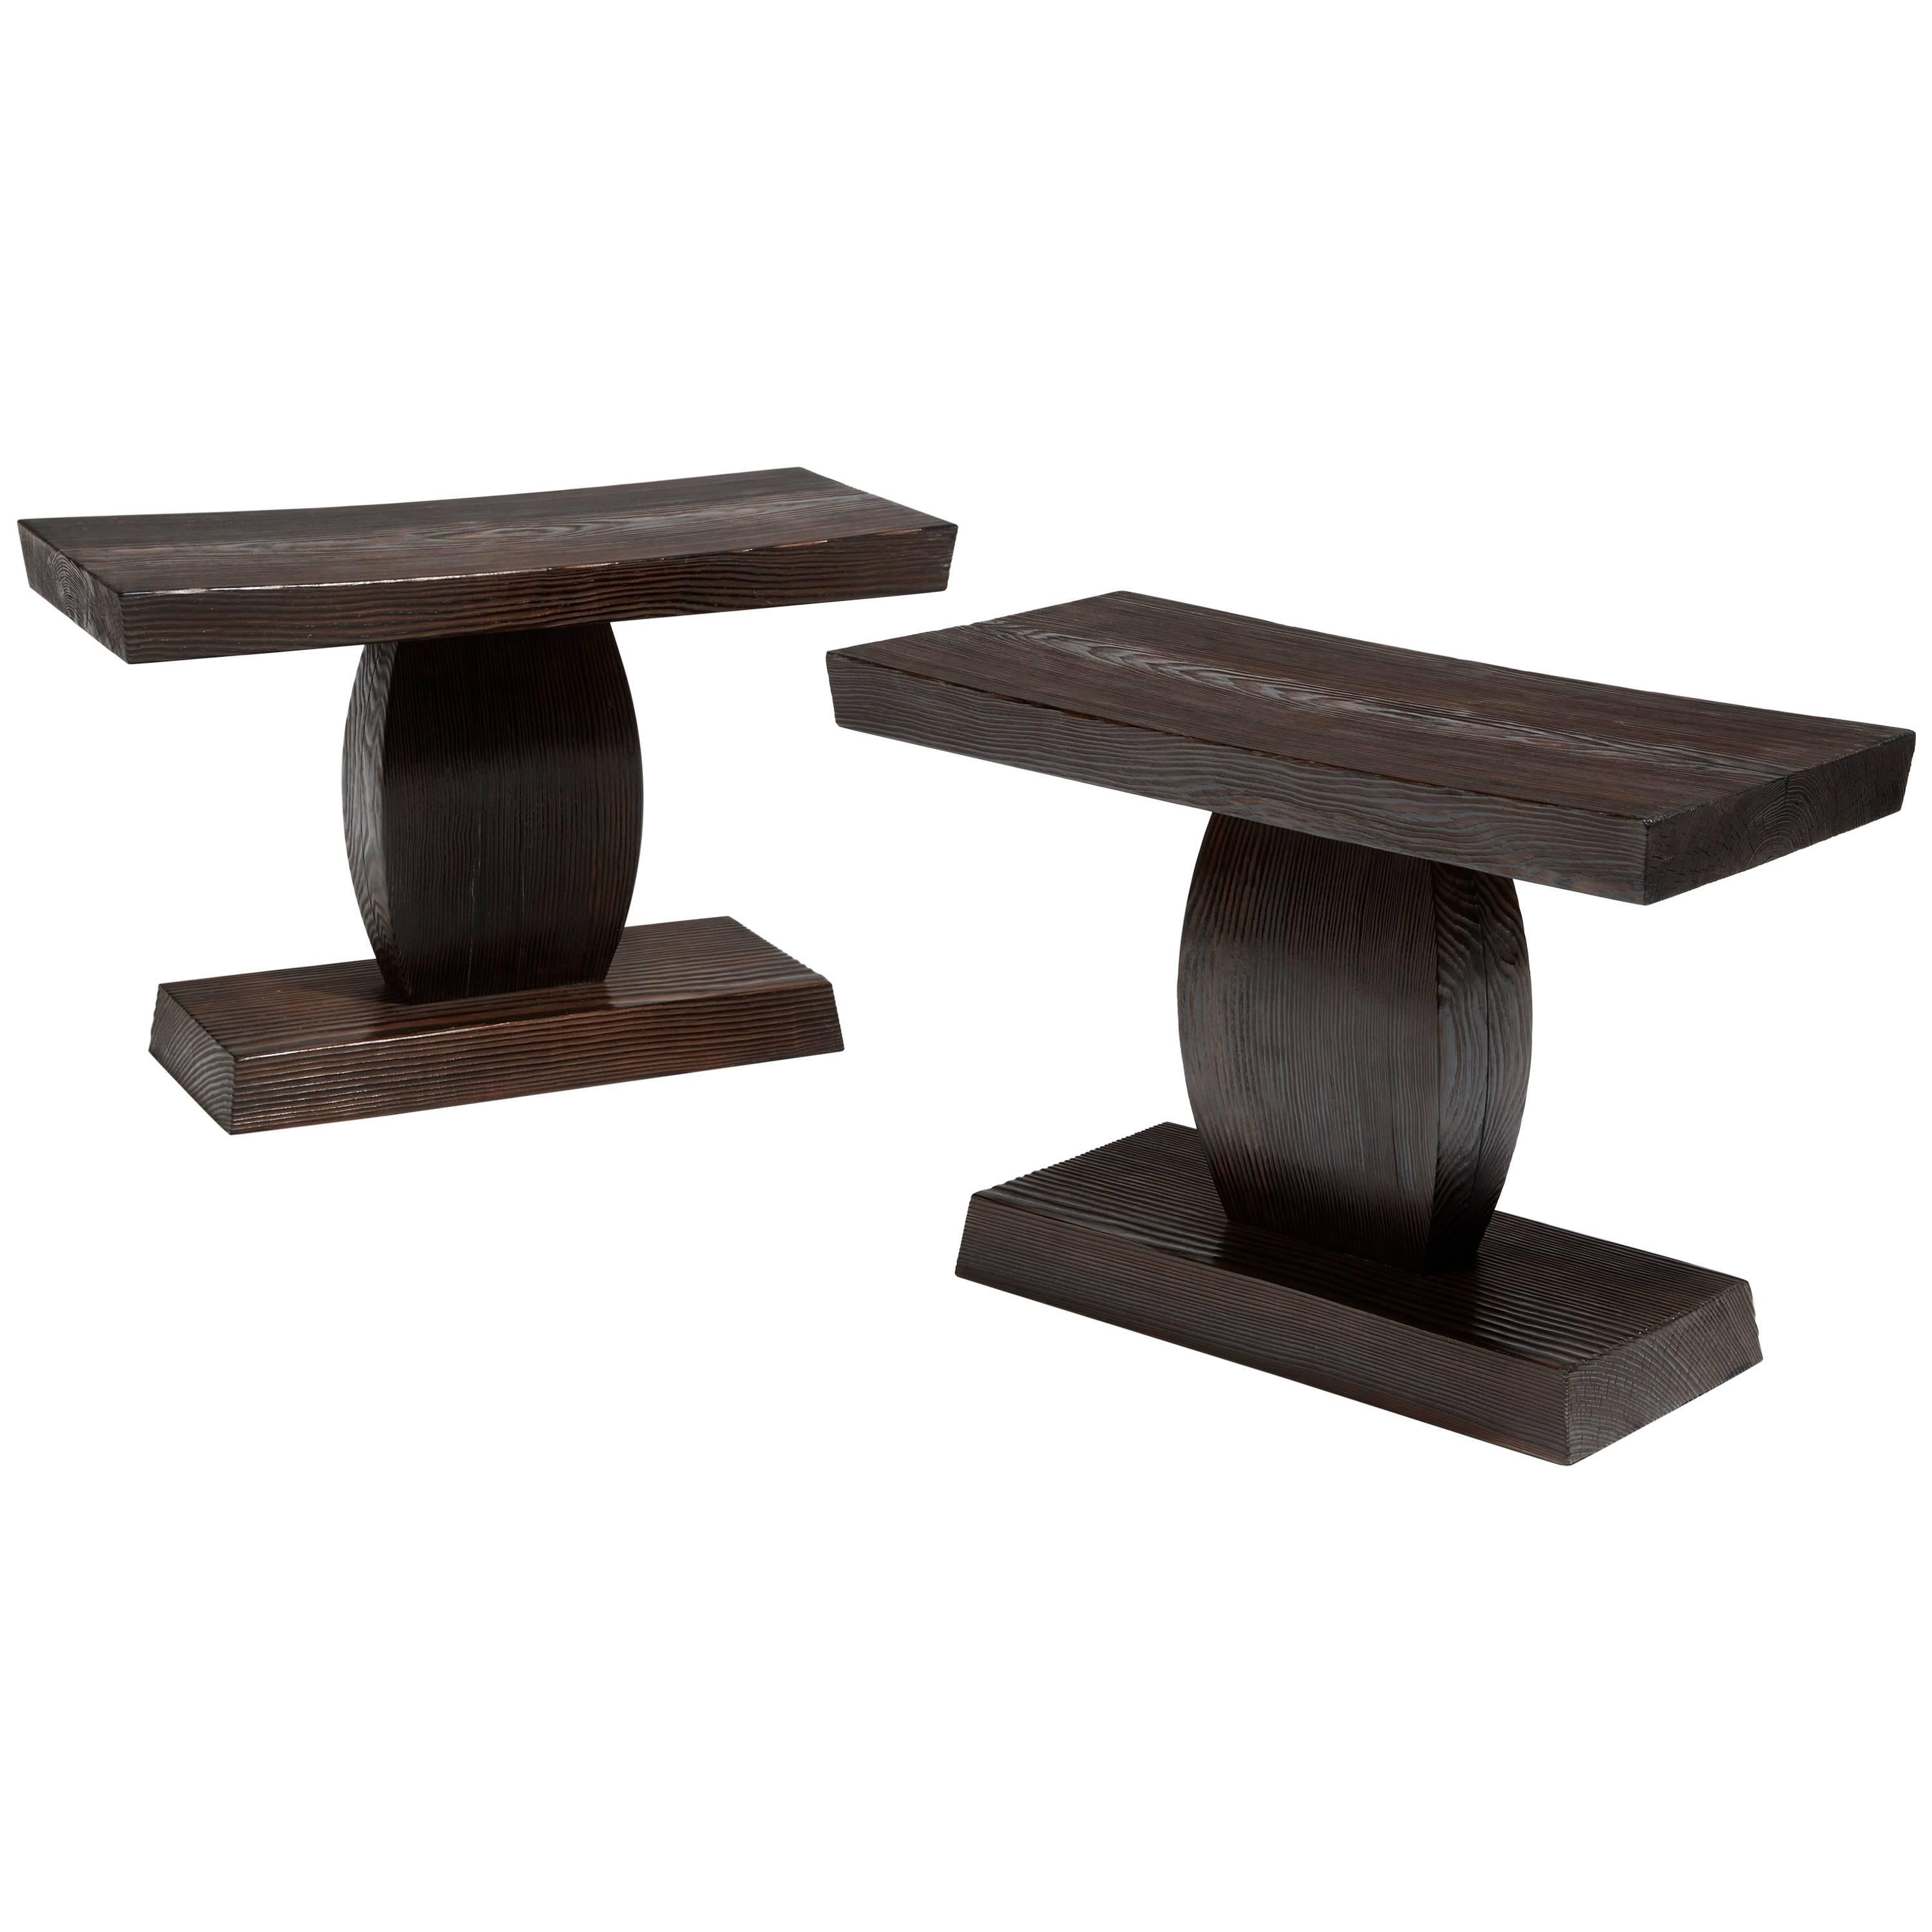 Pair of Burnt Pinewood Stools by WH Studio